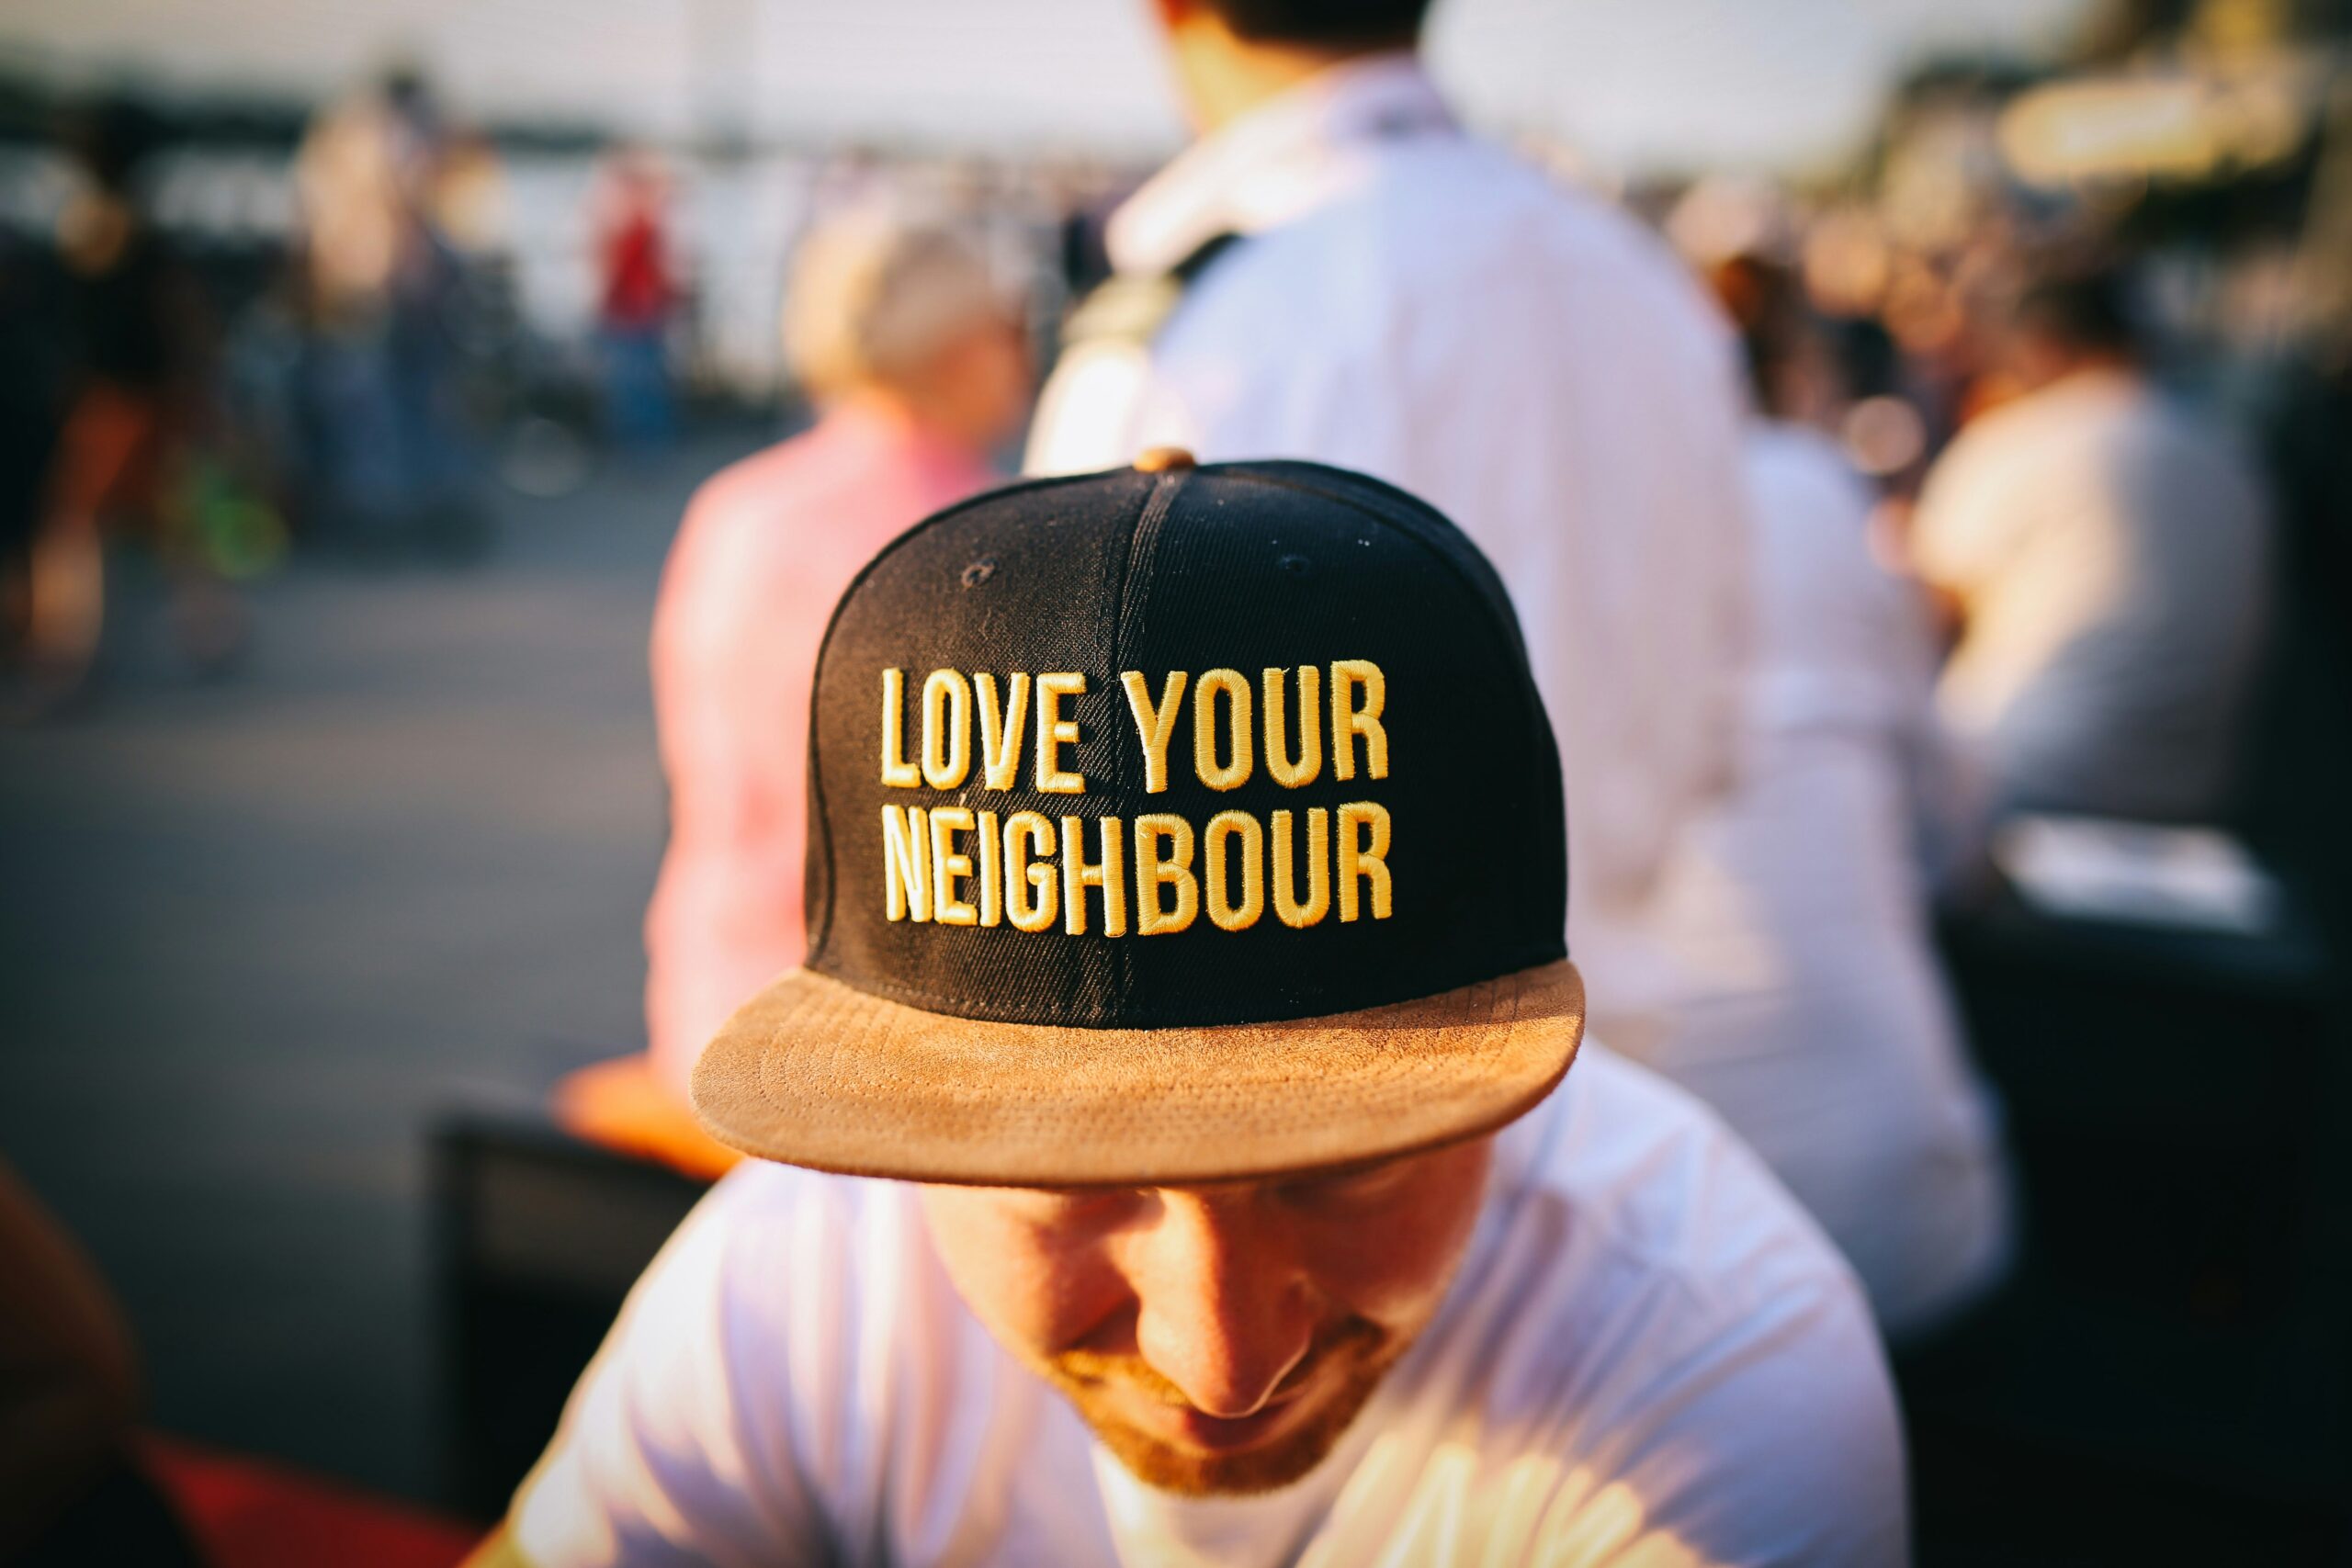 Man wearing a hat that says, "Love Your Neighbor" with some people blurry behind him.